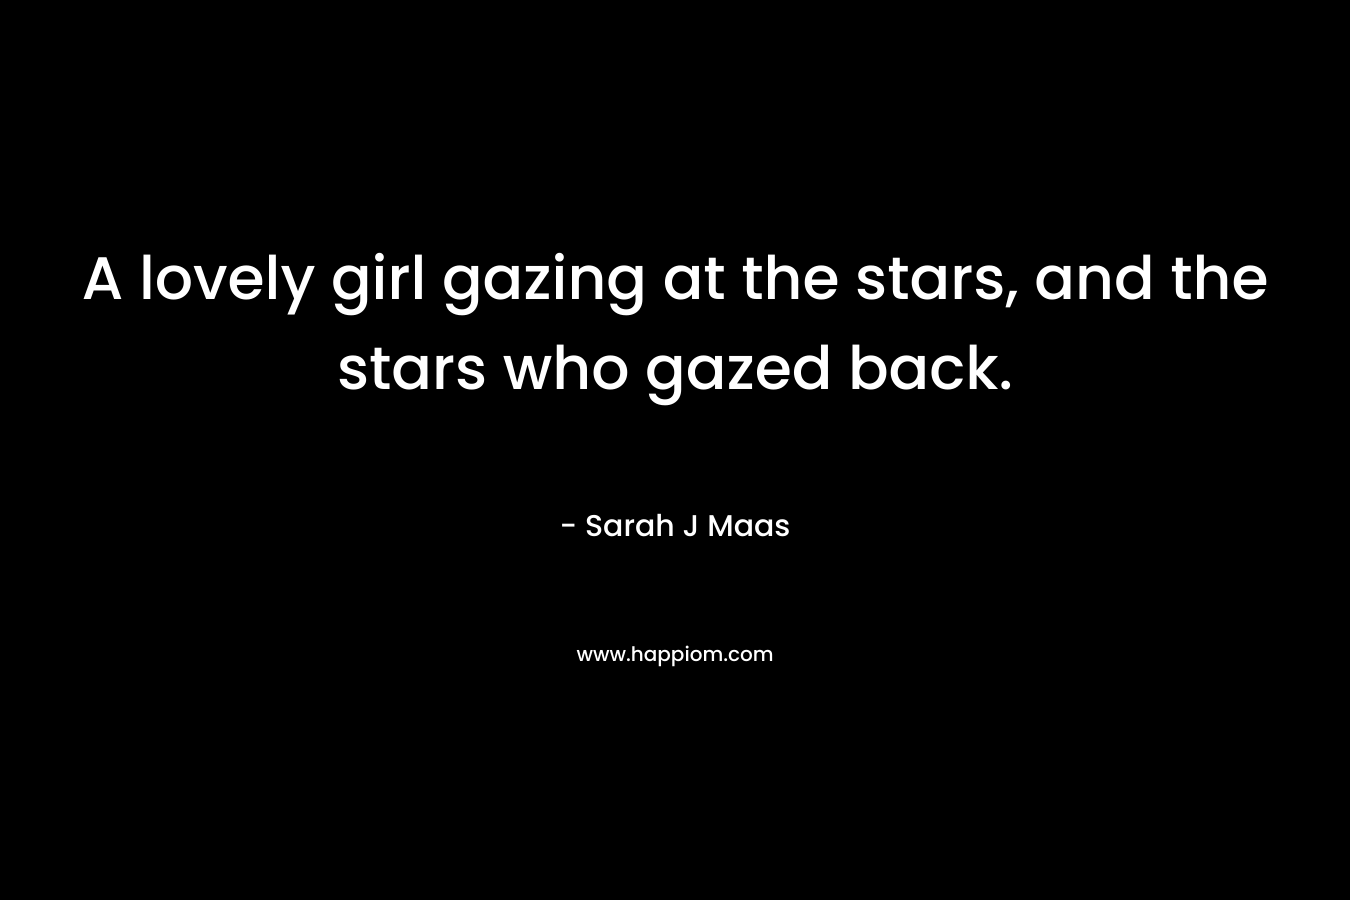 A lovely girl gazing at the stars, and the stars who gazed back.